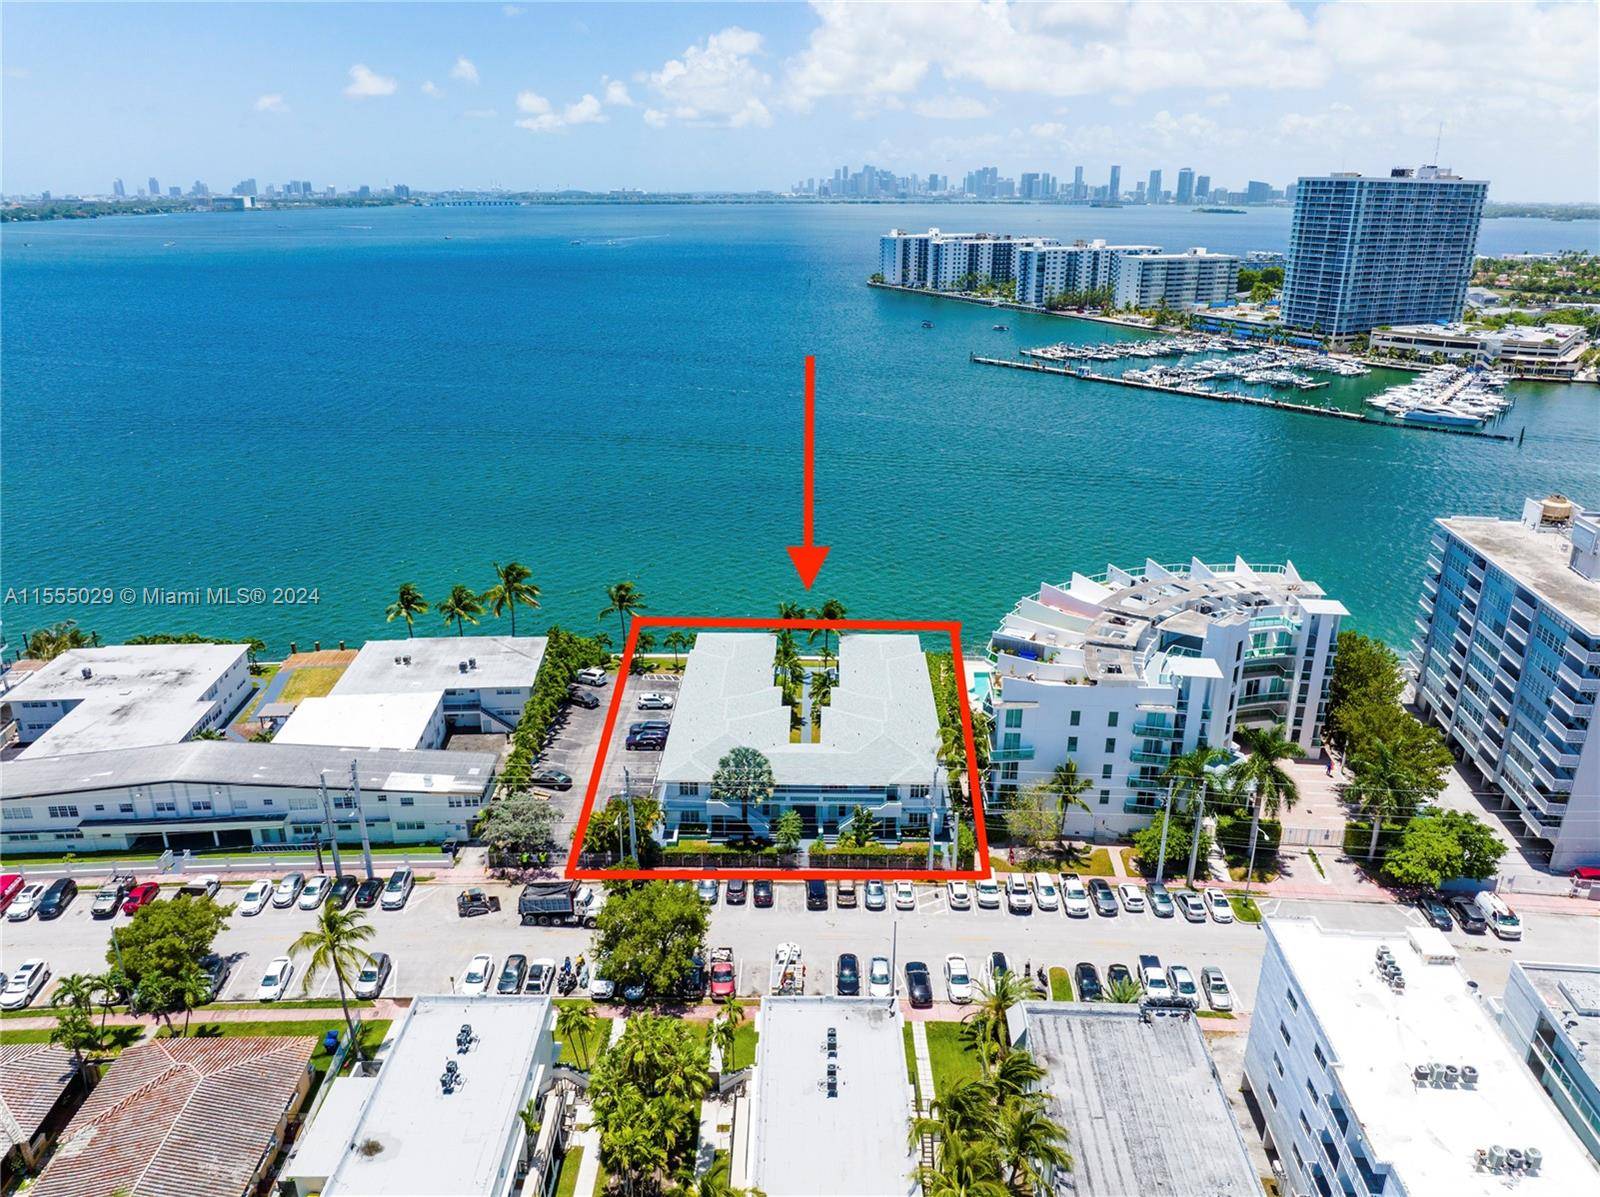 Experience stunning panoramic views of South Beach and Downtown Miami from beautiful architectural platforms suspended above the water.